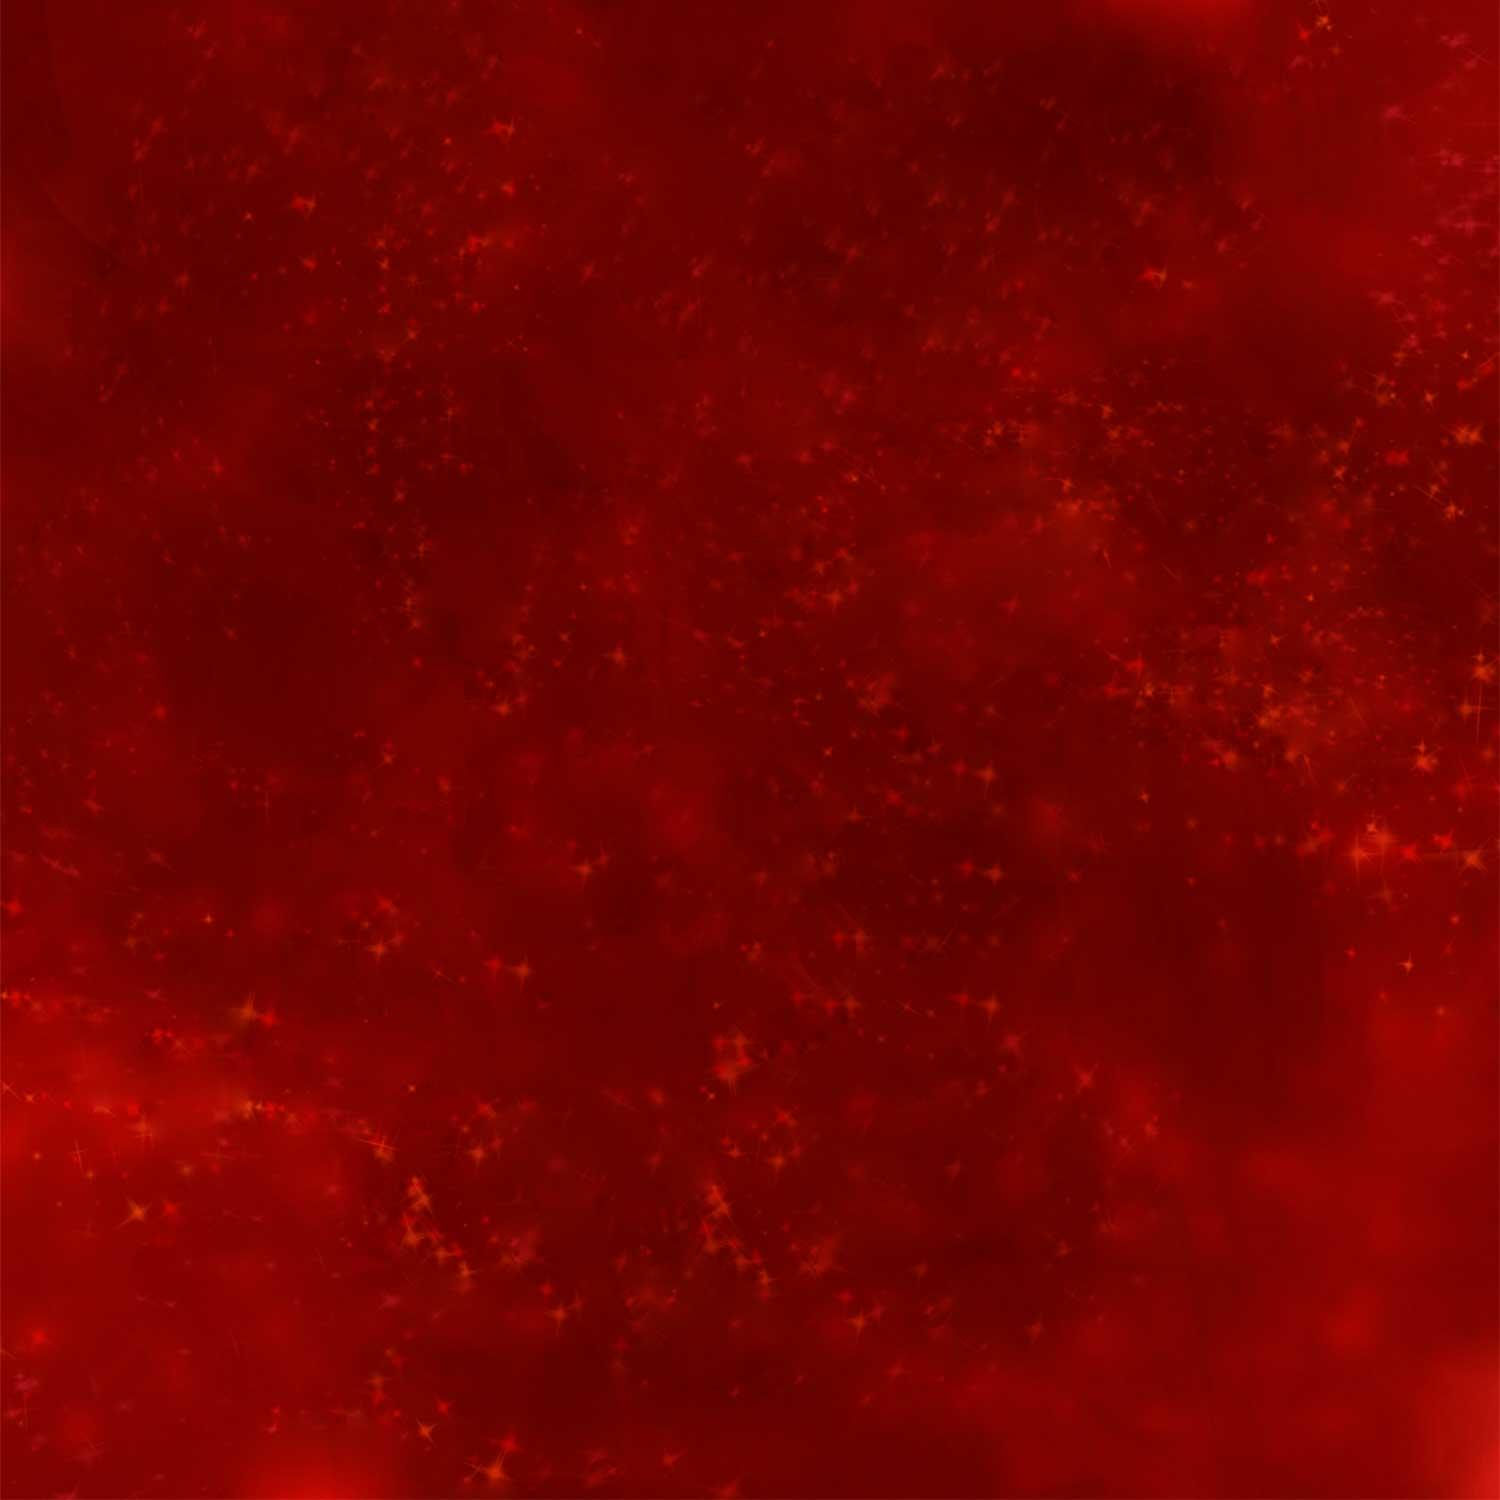 Decorative red texture background